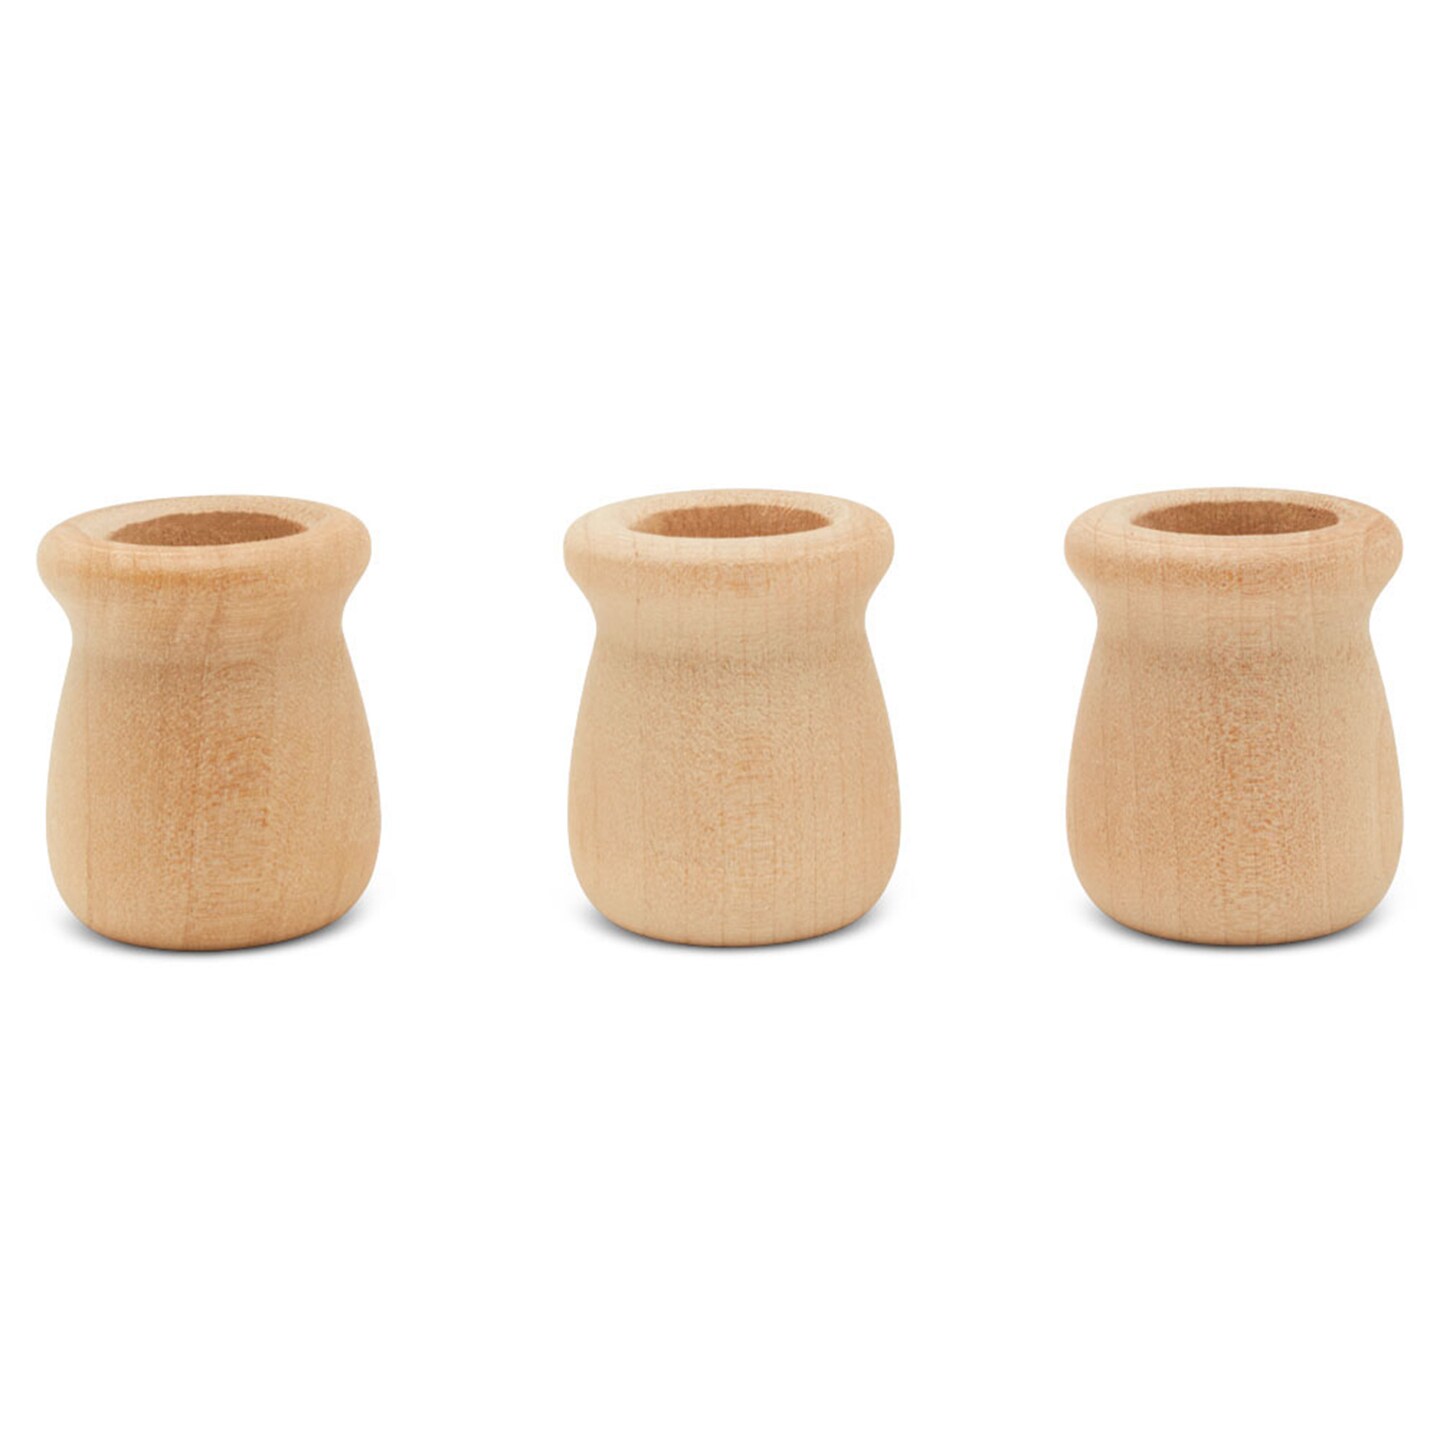 Candle Cups: Nickel (Pack of 5) [Candle Cups: Nickel (Pack of 5)] - R52.00  : Mr Woodturner, Pen kits, project turning kits and accessories